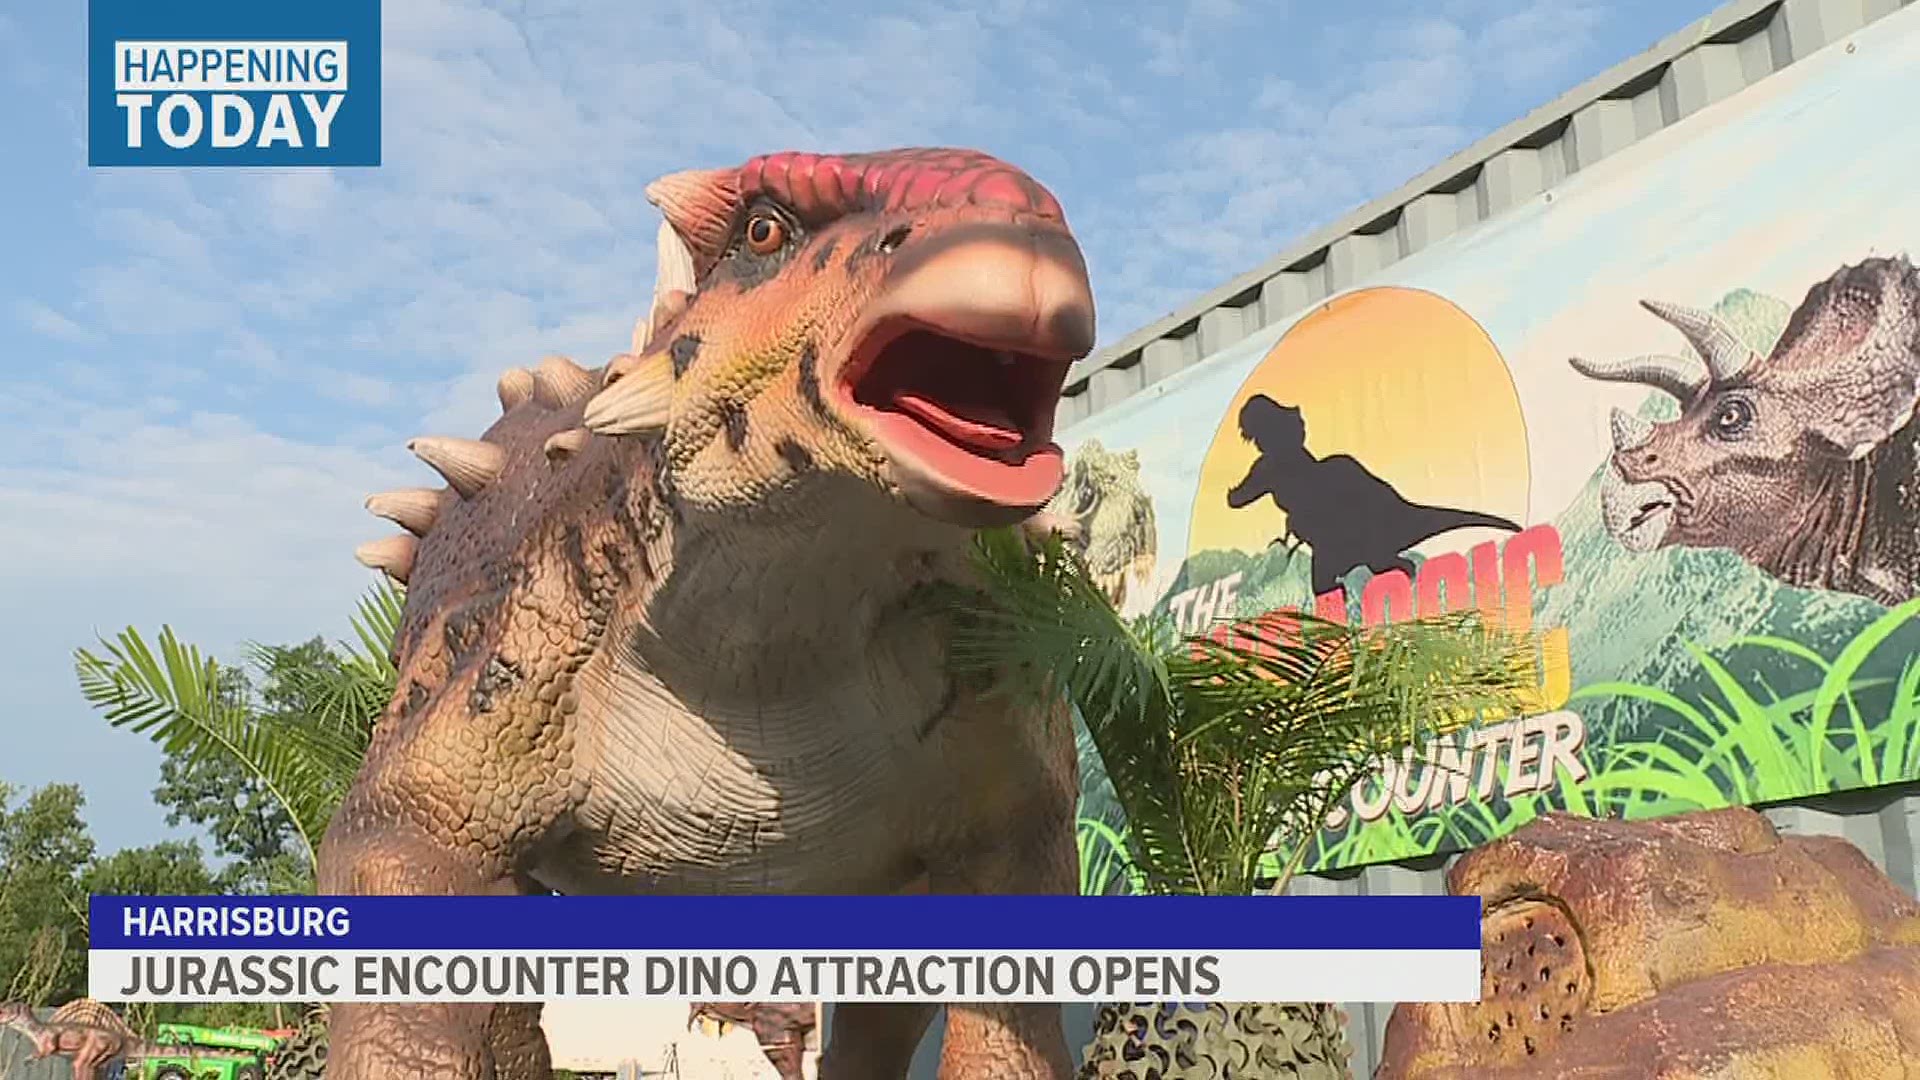 More than 55 animatronic dinosaurs will be featured in Harrisburg |  